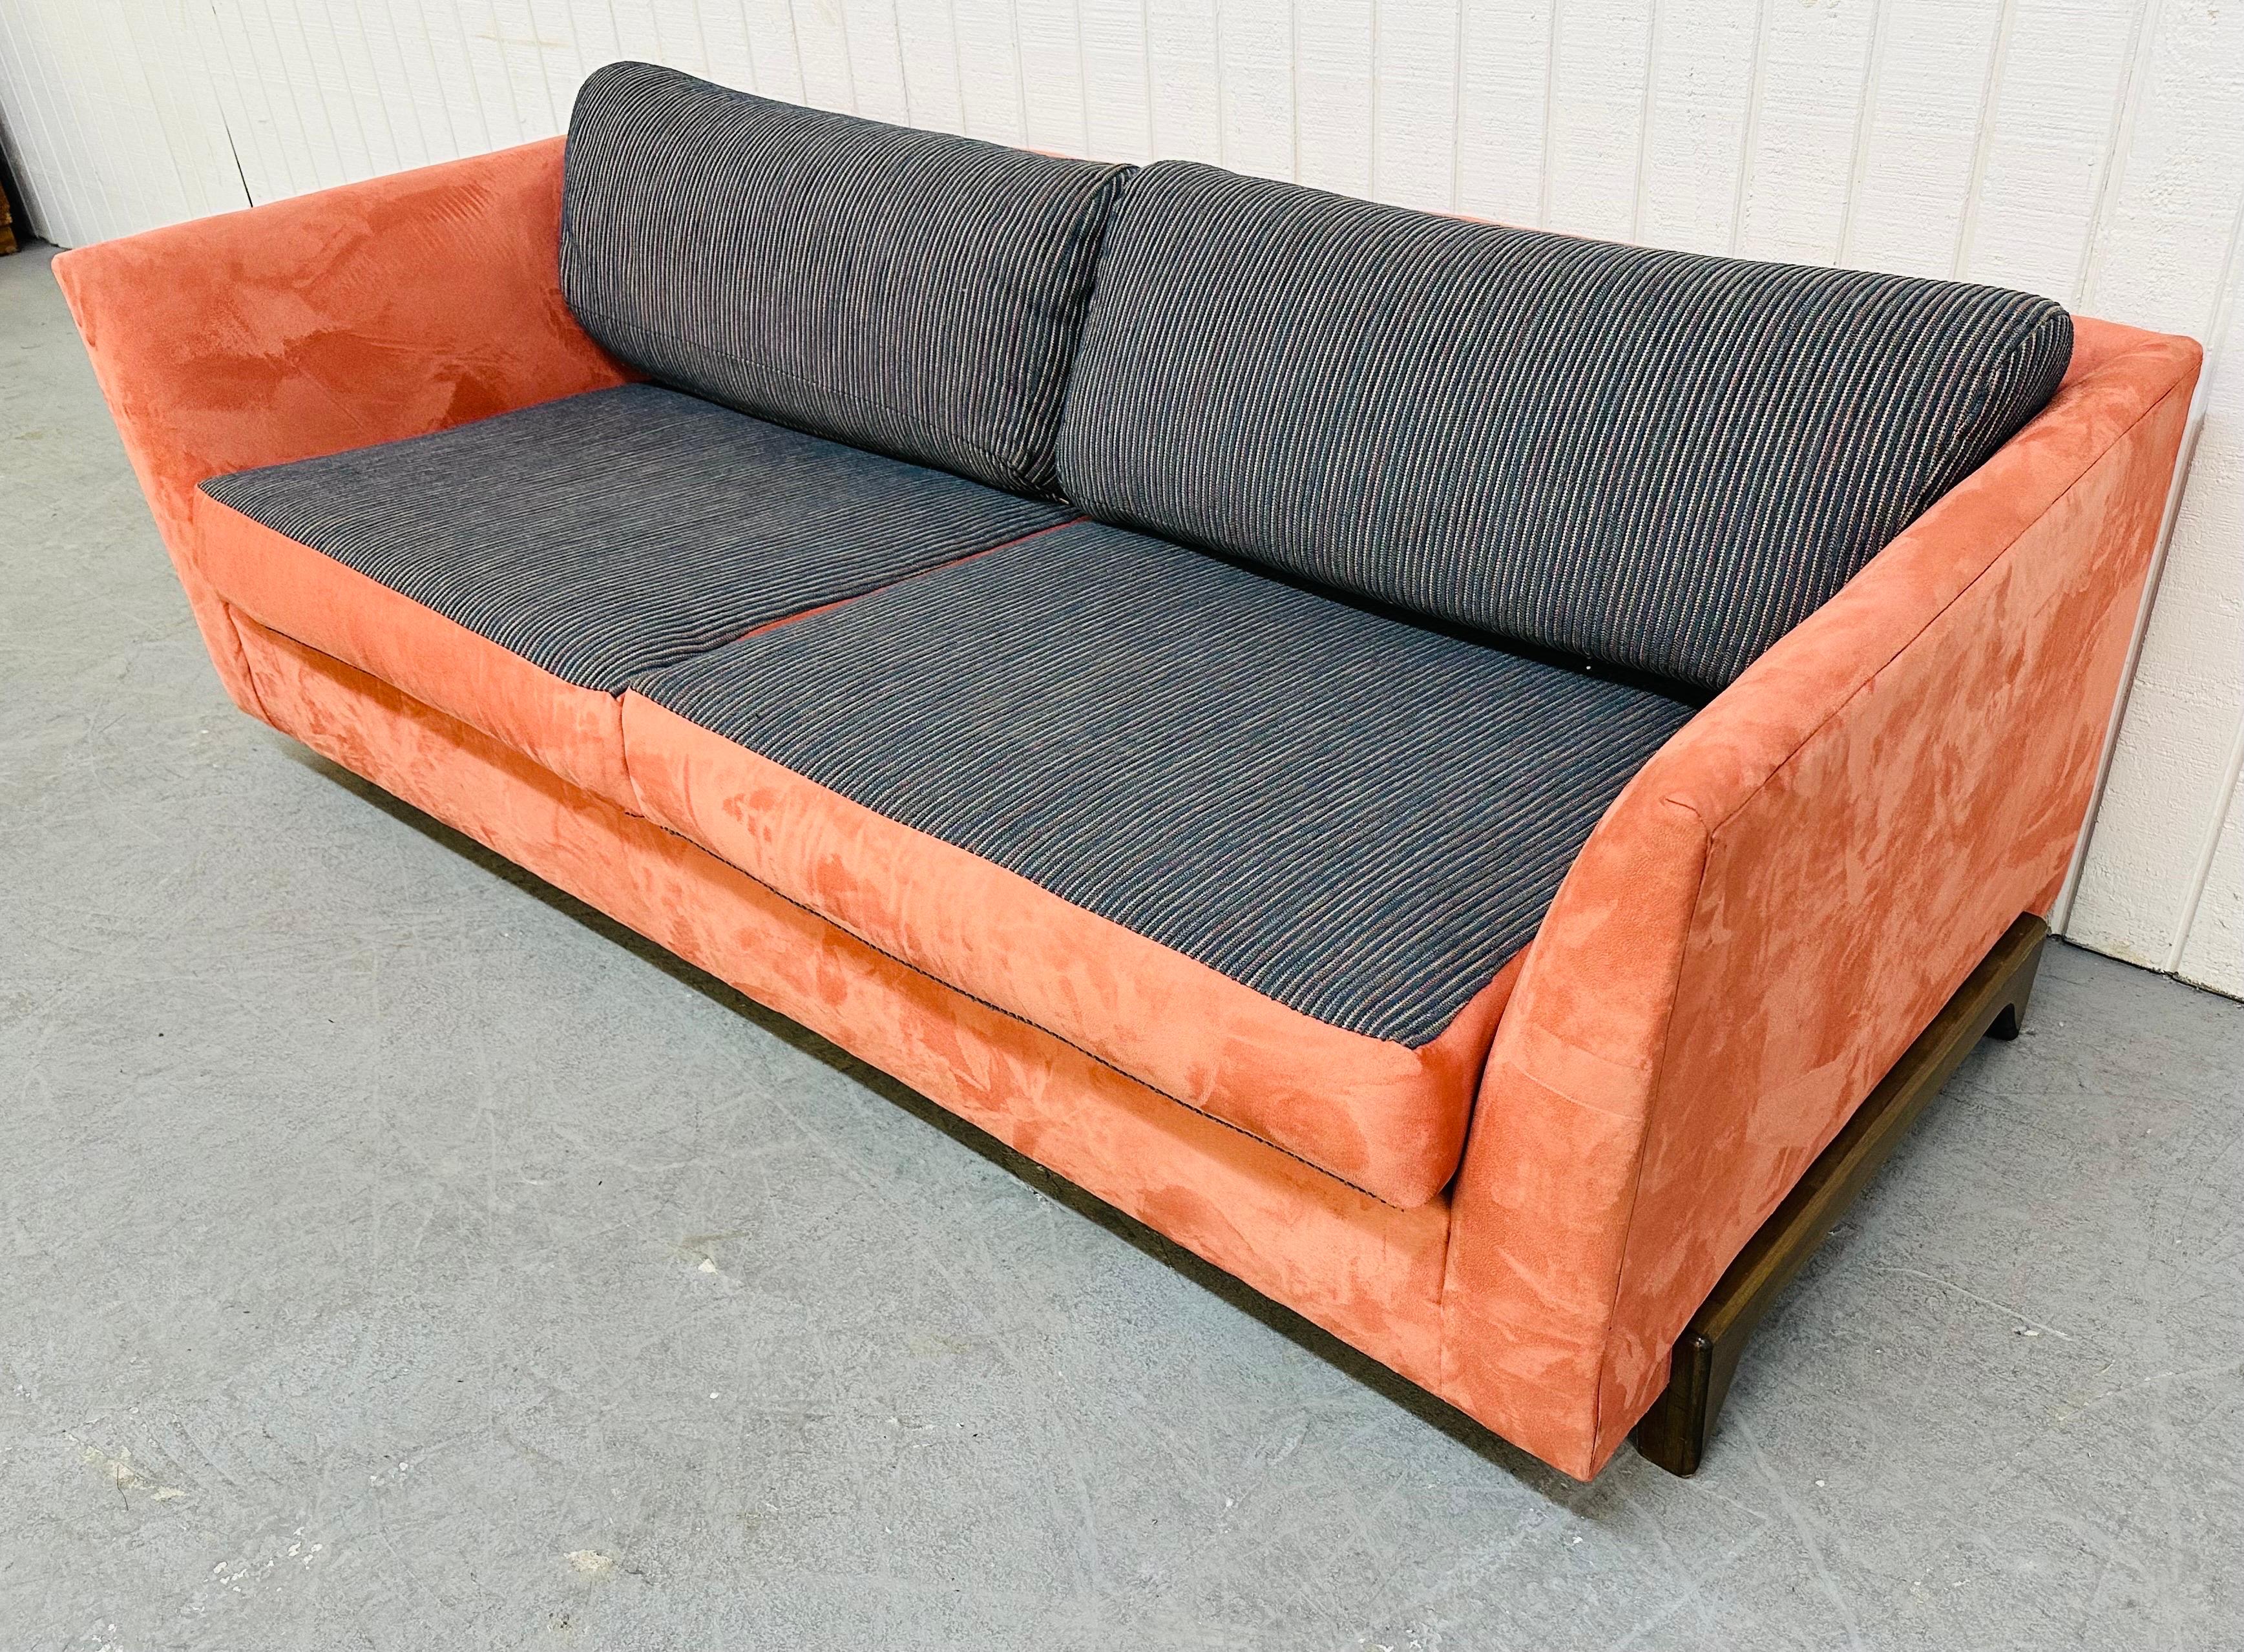 This listing is for a Vintage Modern Salmon Sofa. Featuring two large cushions for seating, walnut legs on the sides, and a beautiful salmon colored upholstery with blue cushions.